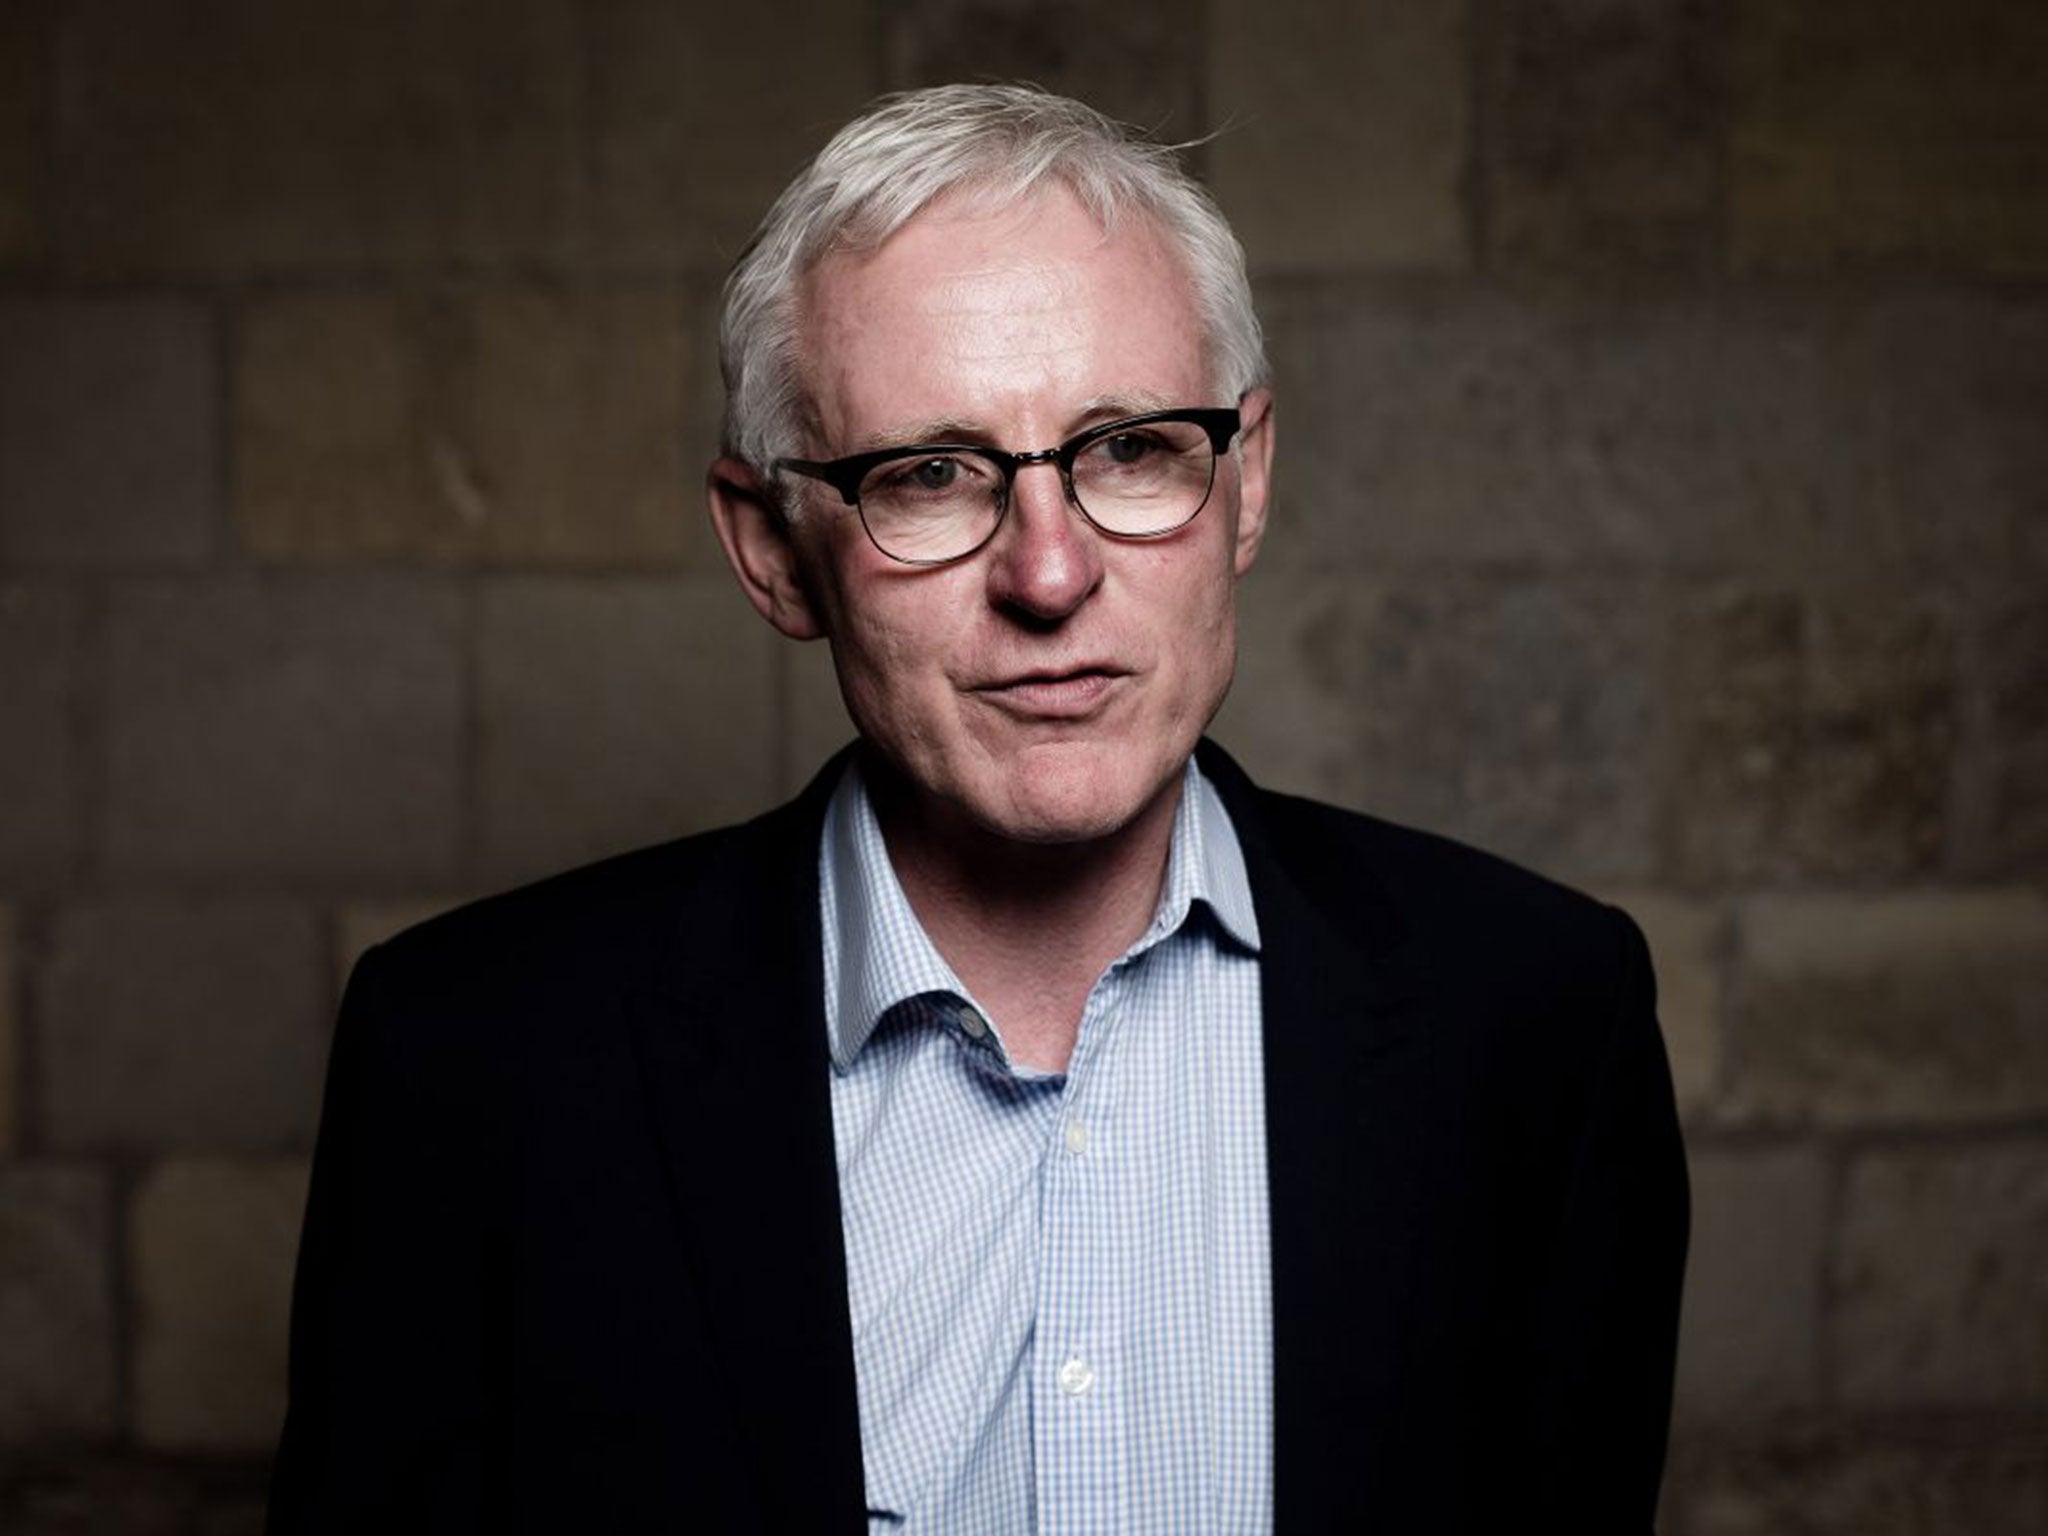 Norman Lamb, chair of the Science and Technology committee, warned that the government's approach was 'unacceptable'